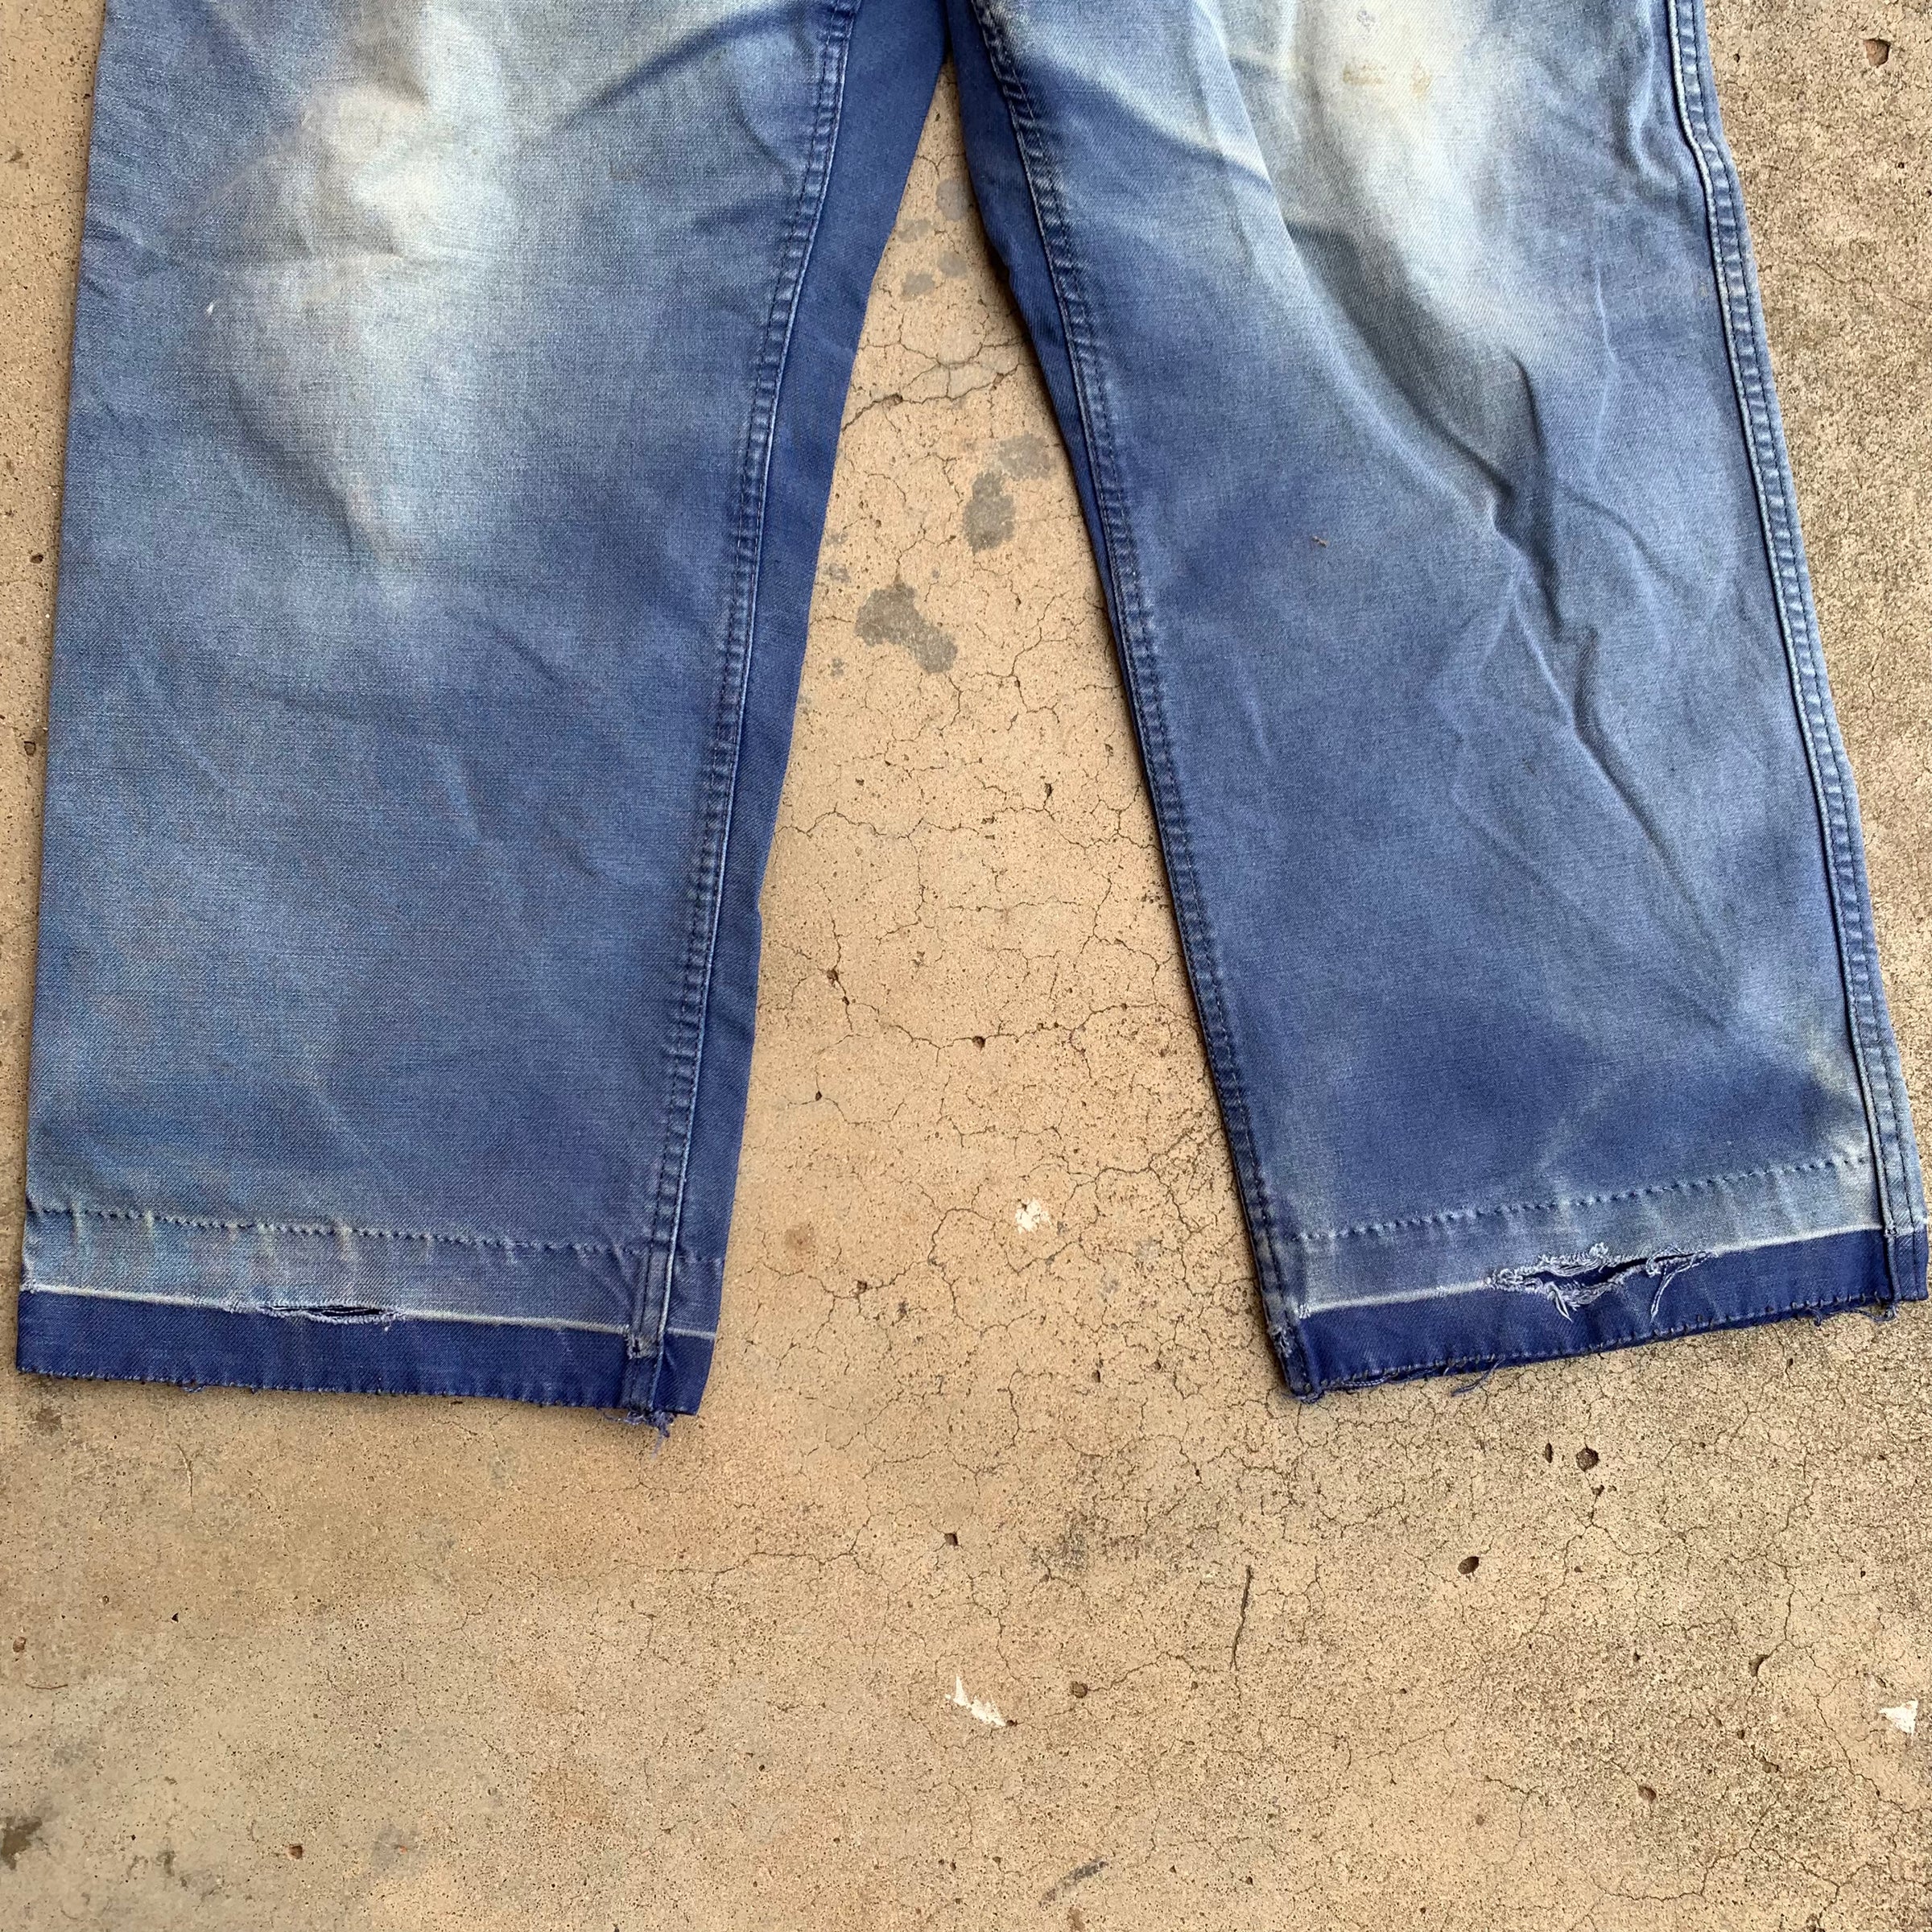 1960’s/70’s French Work Pants 39” x 26”